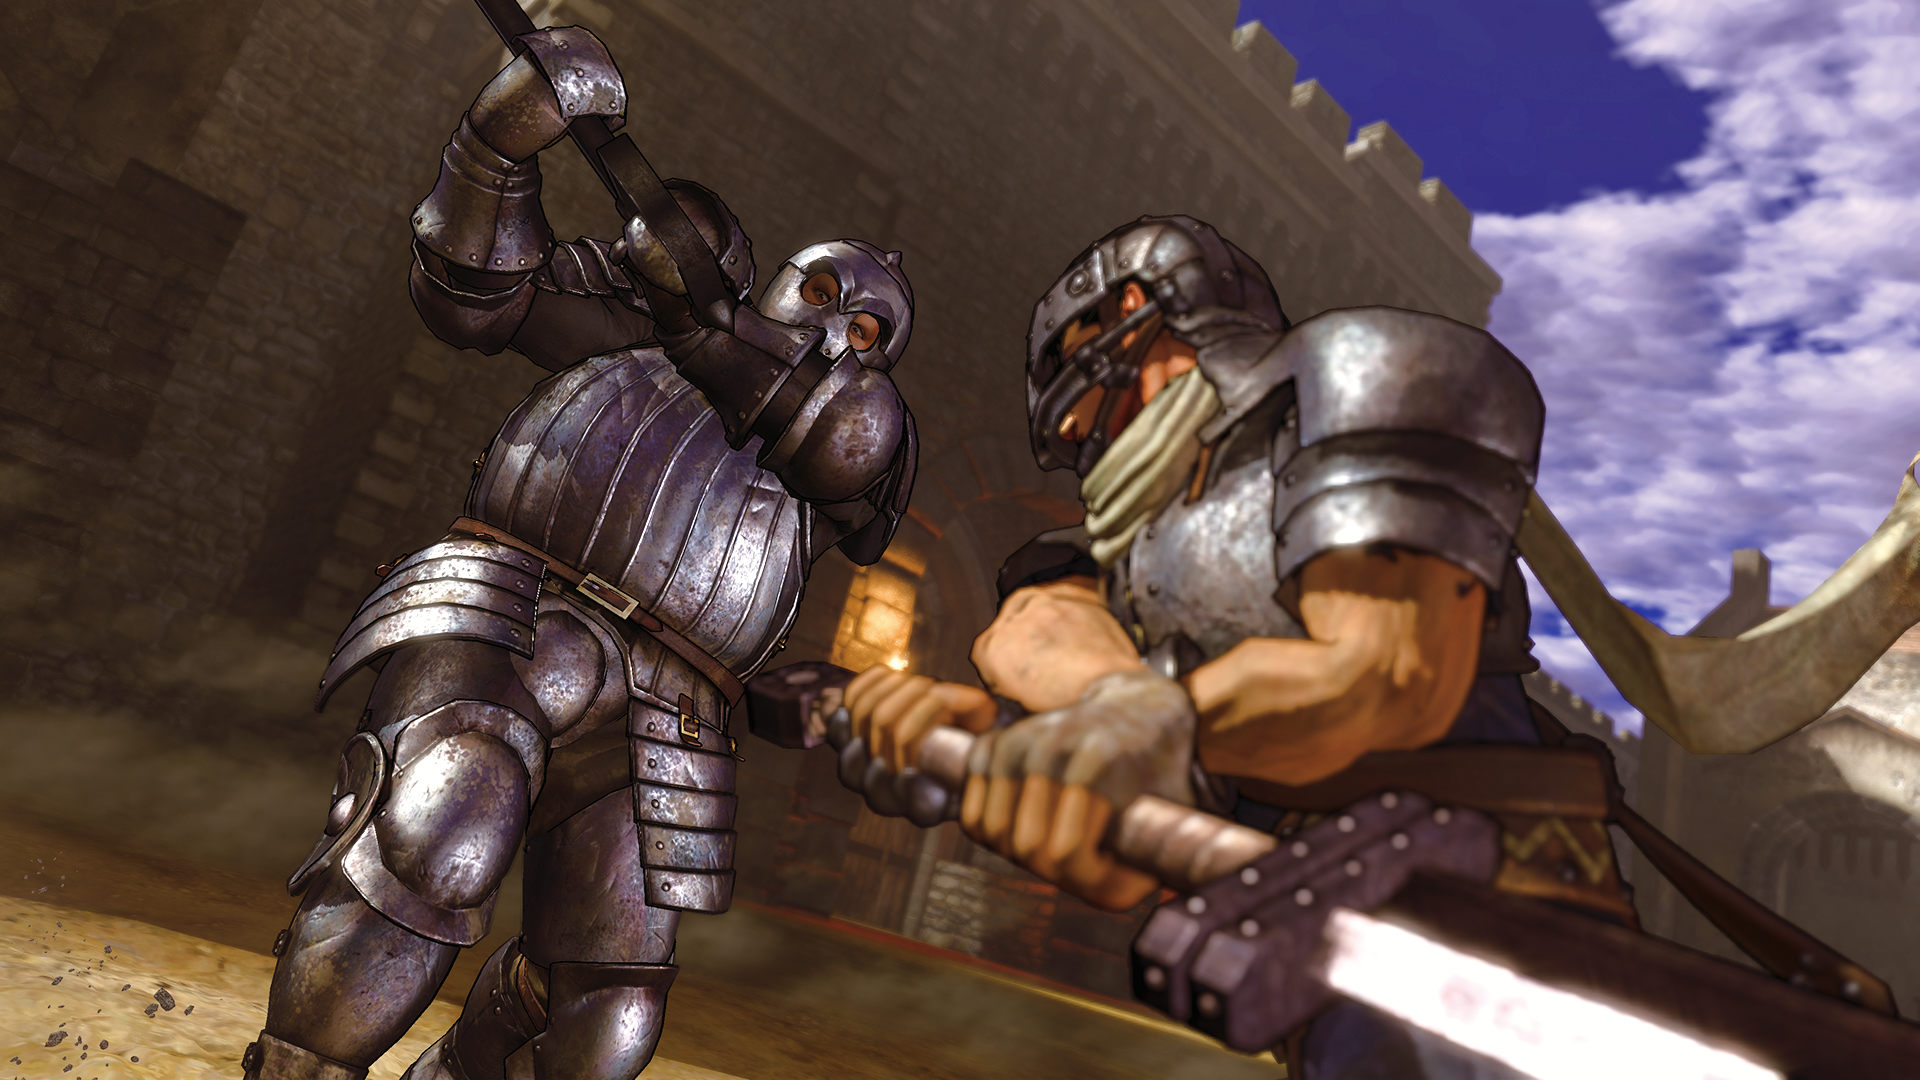 BERSERK and the Band of the Hawk on Steam